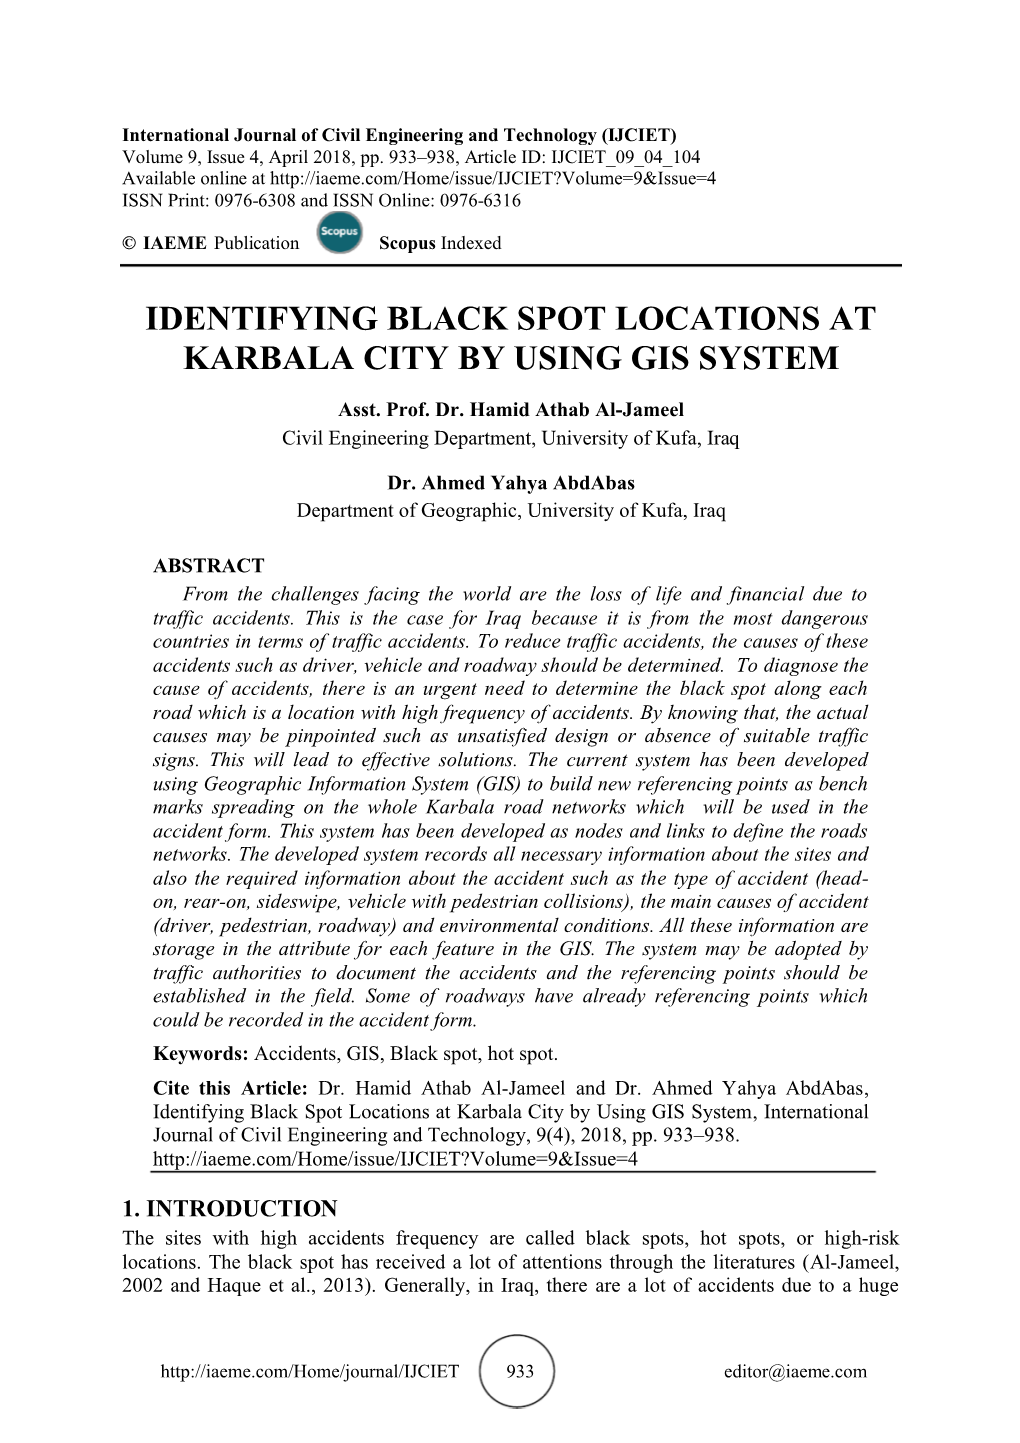 Identifying Black Spot Locations at Karbala City by Using Gis System